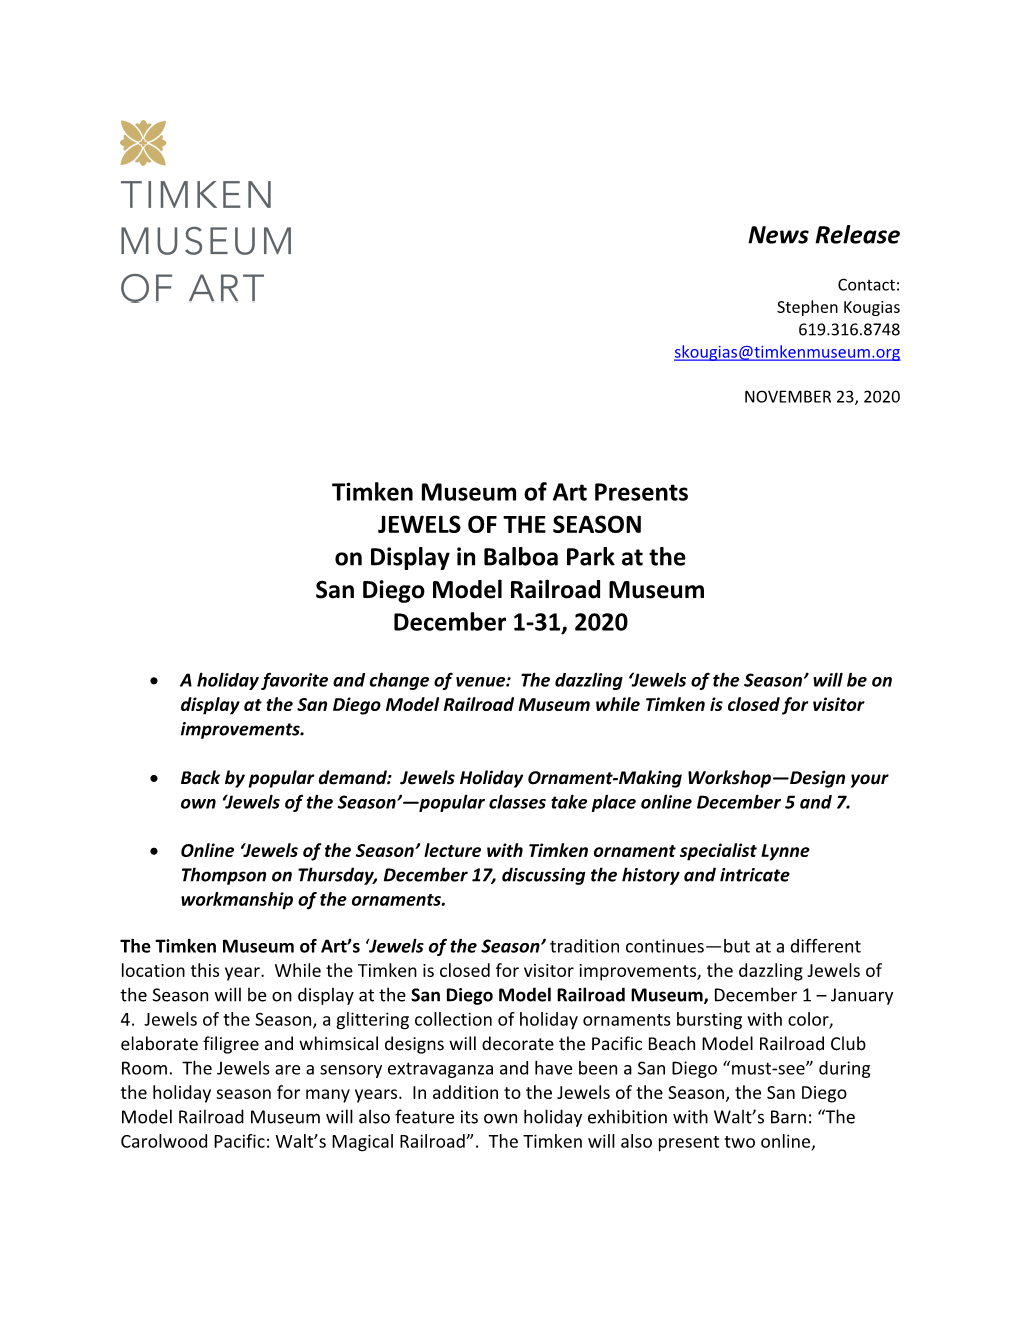 News Release Timken Museum of Art Presents JEWELS of the SEASON on Display in Balboa Park at the San Diego Model Railroad Museum